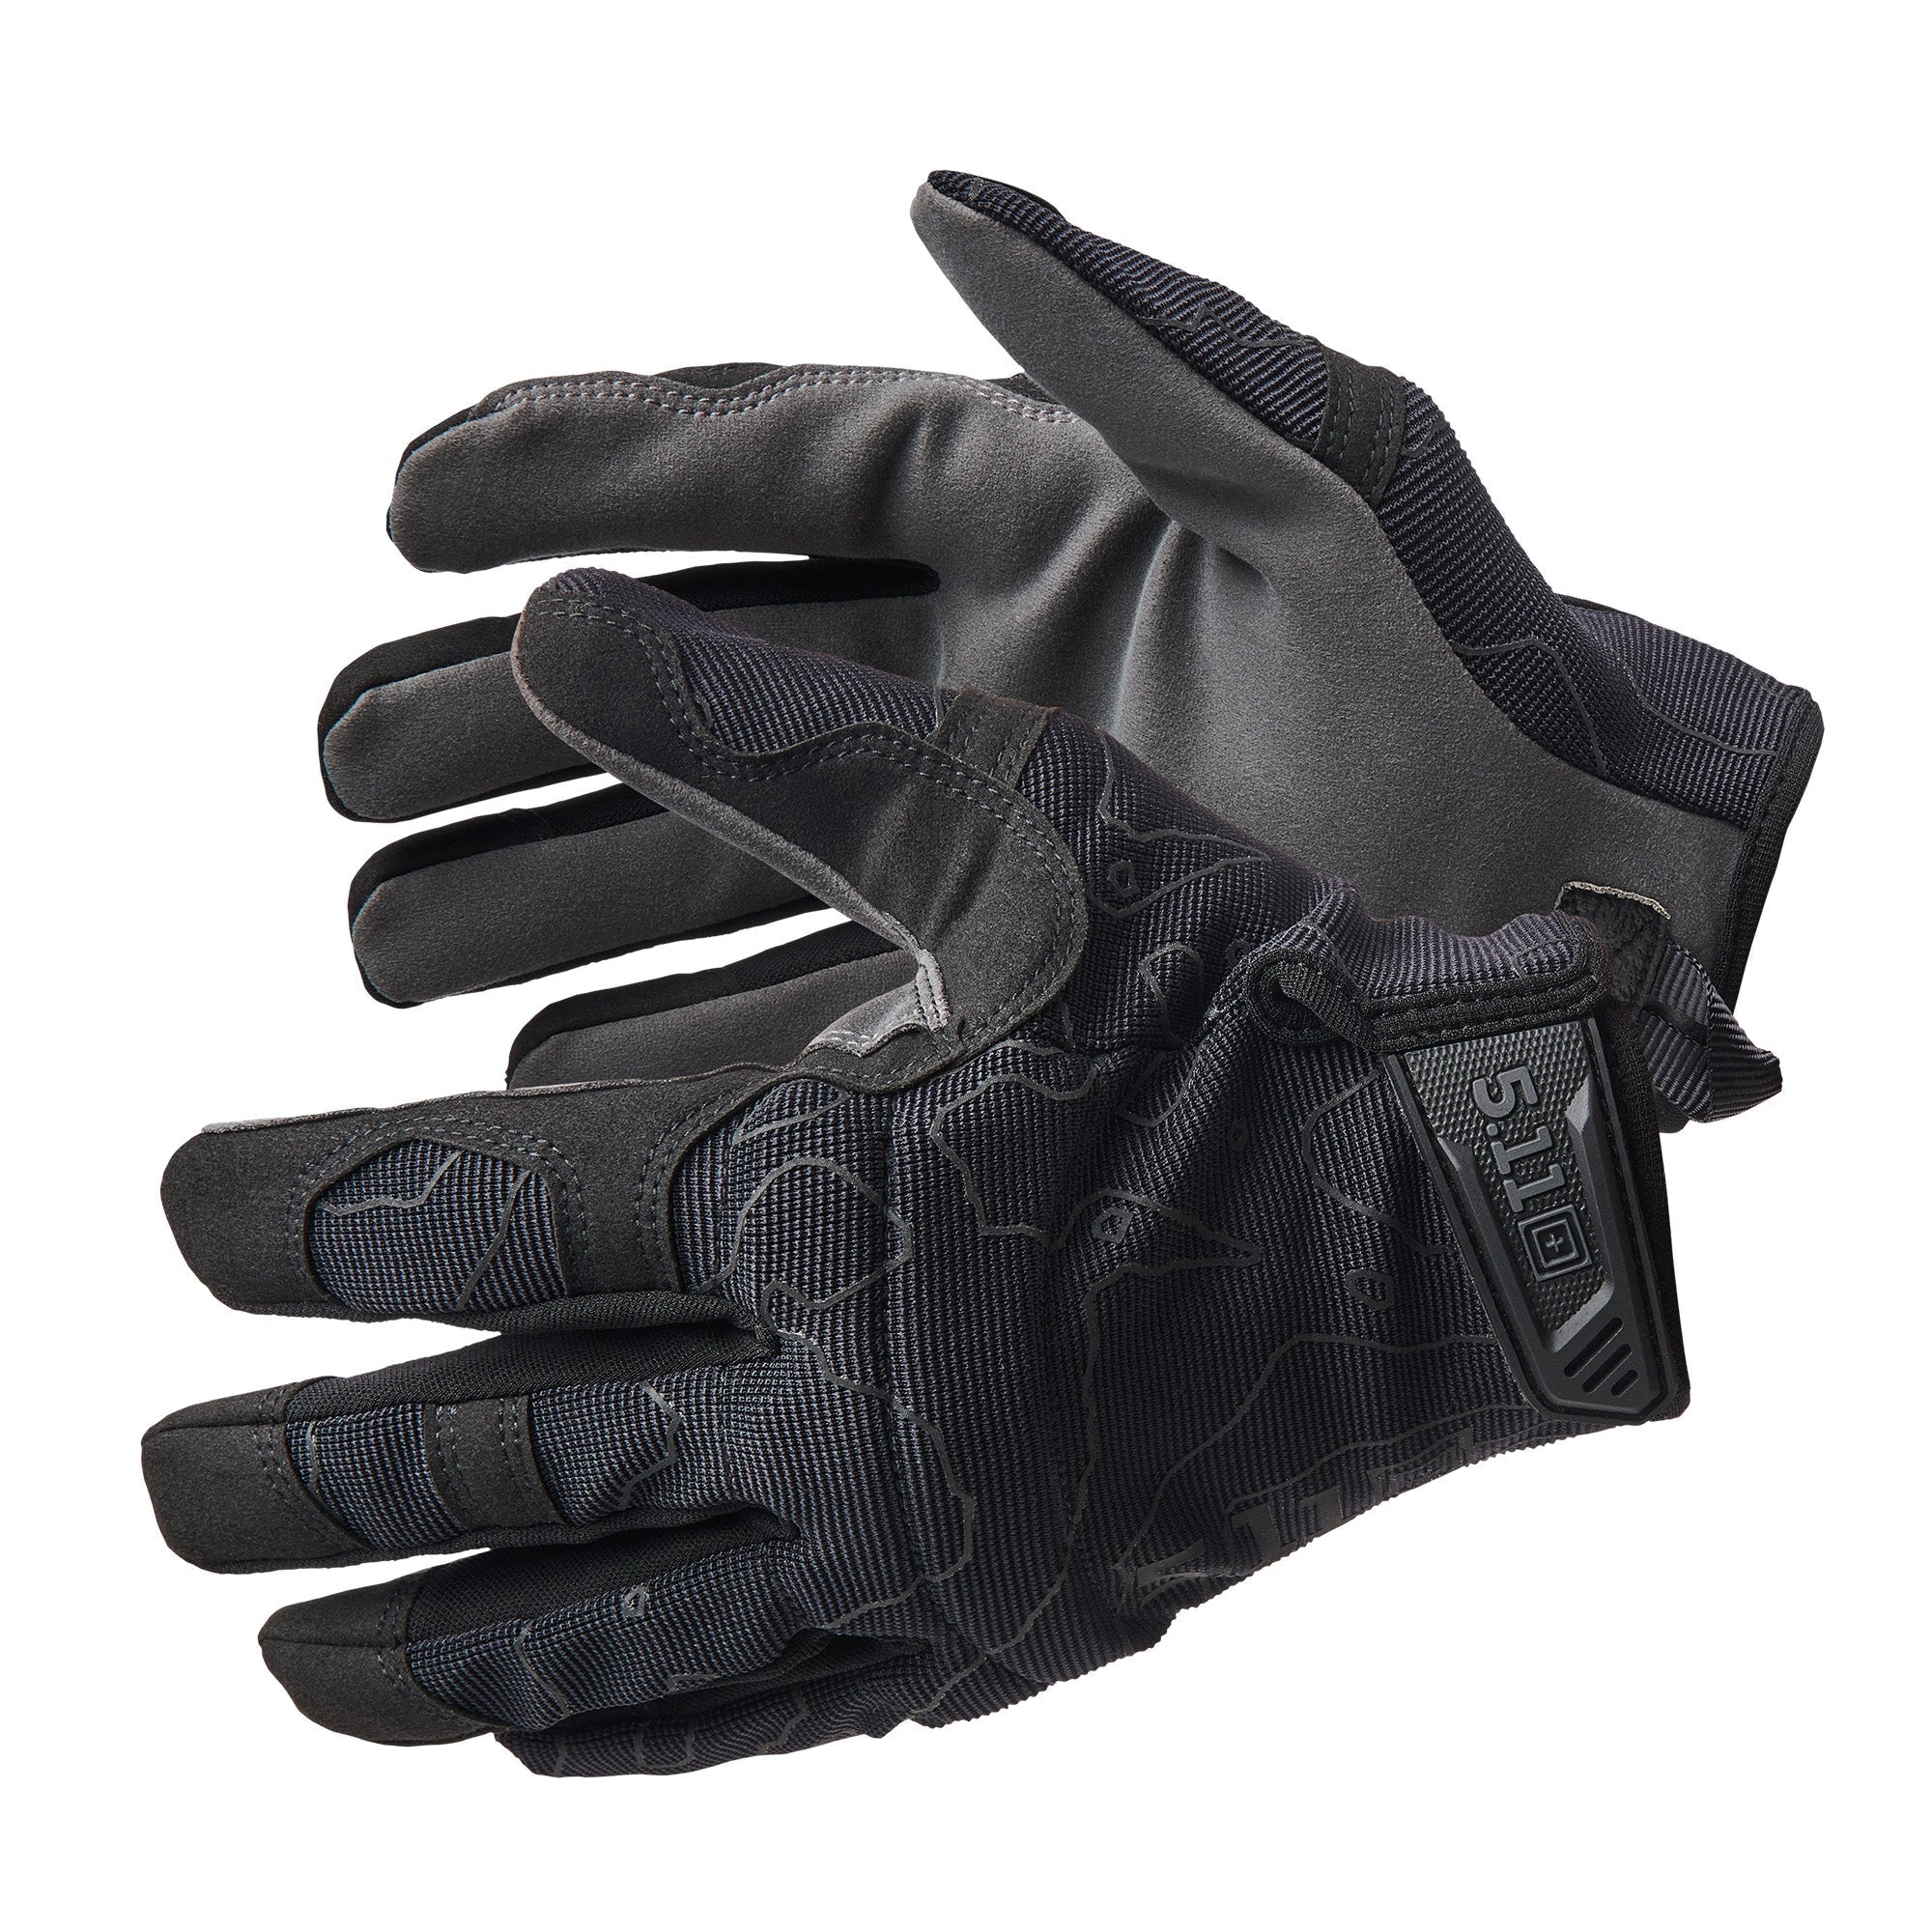 5.11 Tactical High Abrasion 2.0 Glove Gloves 5.11 Tactical Black Small Tactical Gear Supplier Tactical Distributors Australia